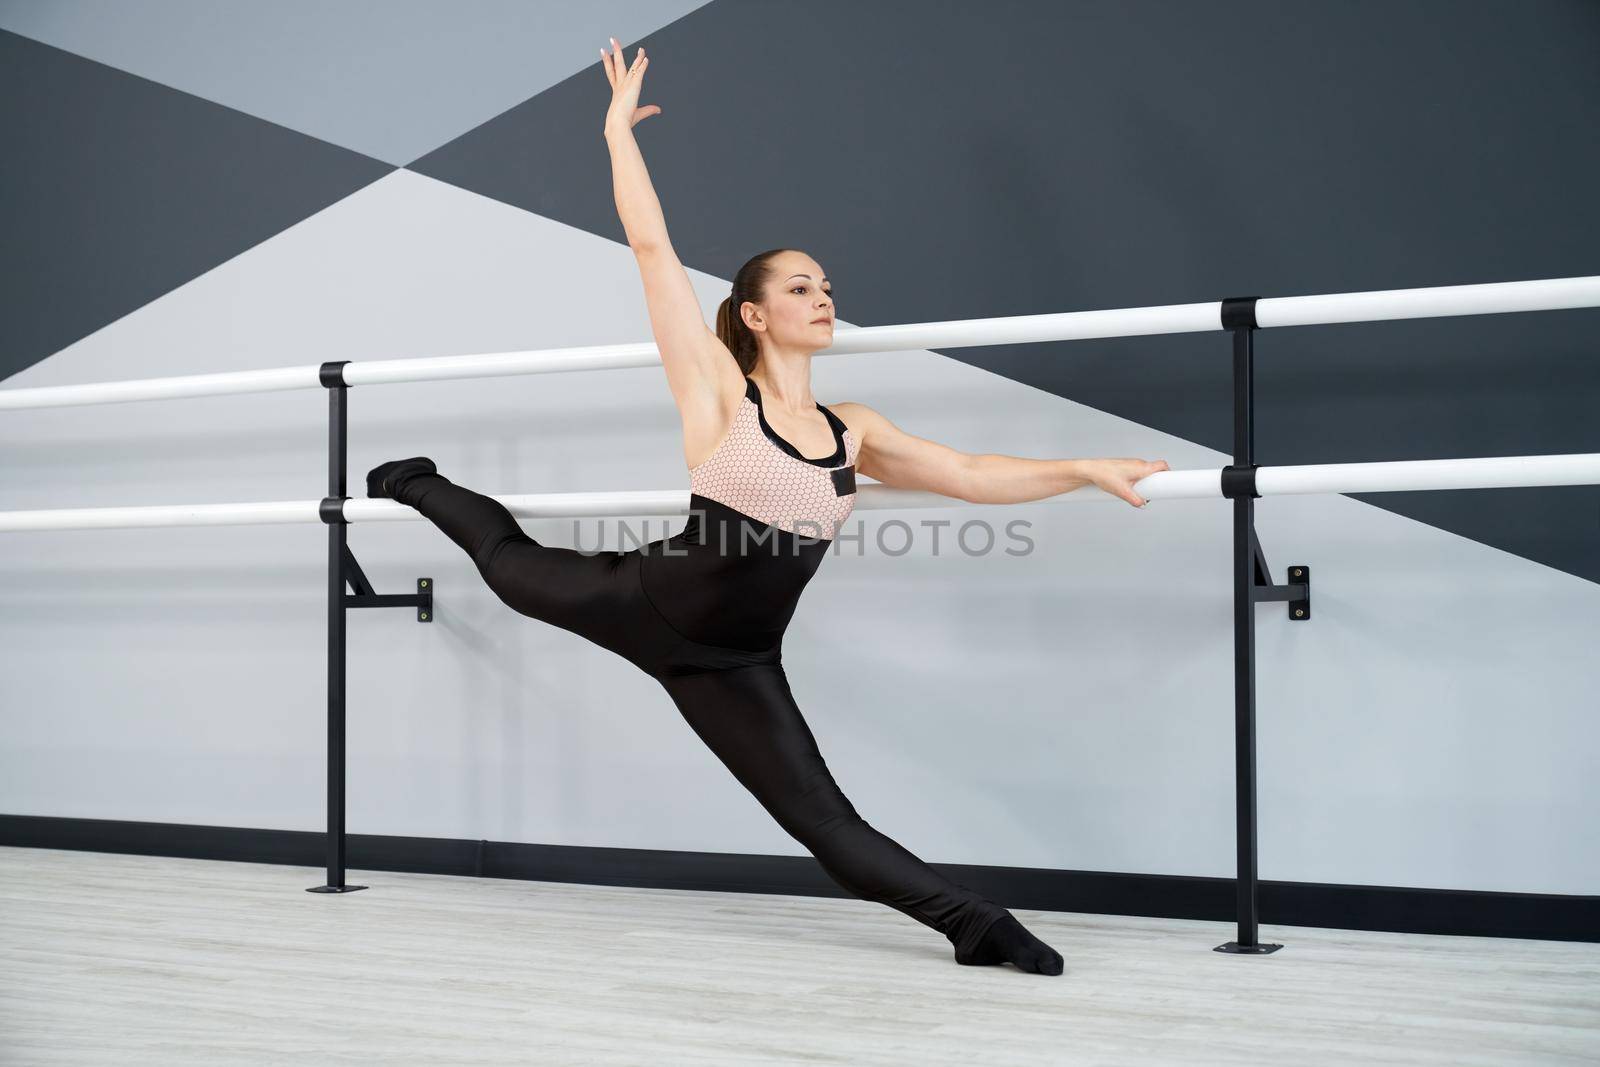 Side view of gorgeous brunette woman stretching leg on handrail, doing split. Fit flexible female athlete wearing sports outfit practicing in dance studio, hi tech interior. Concept of gymnastics.